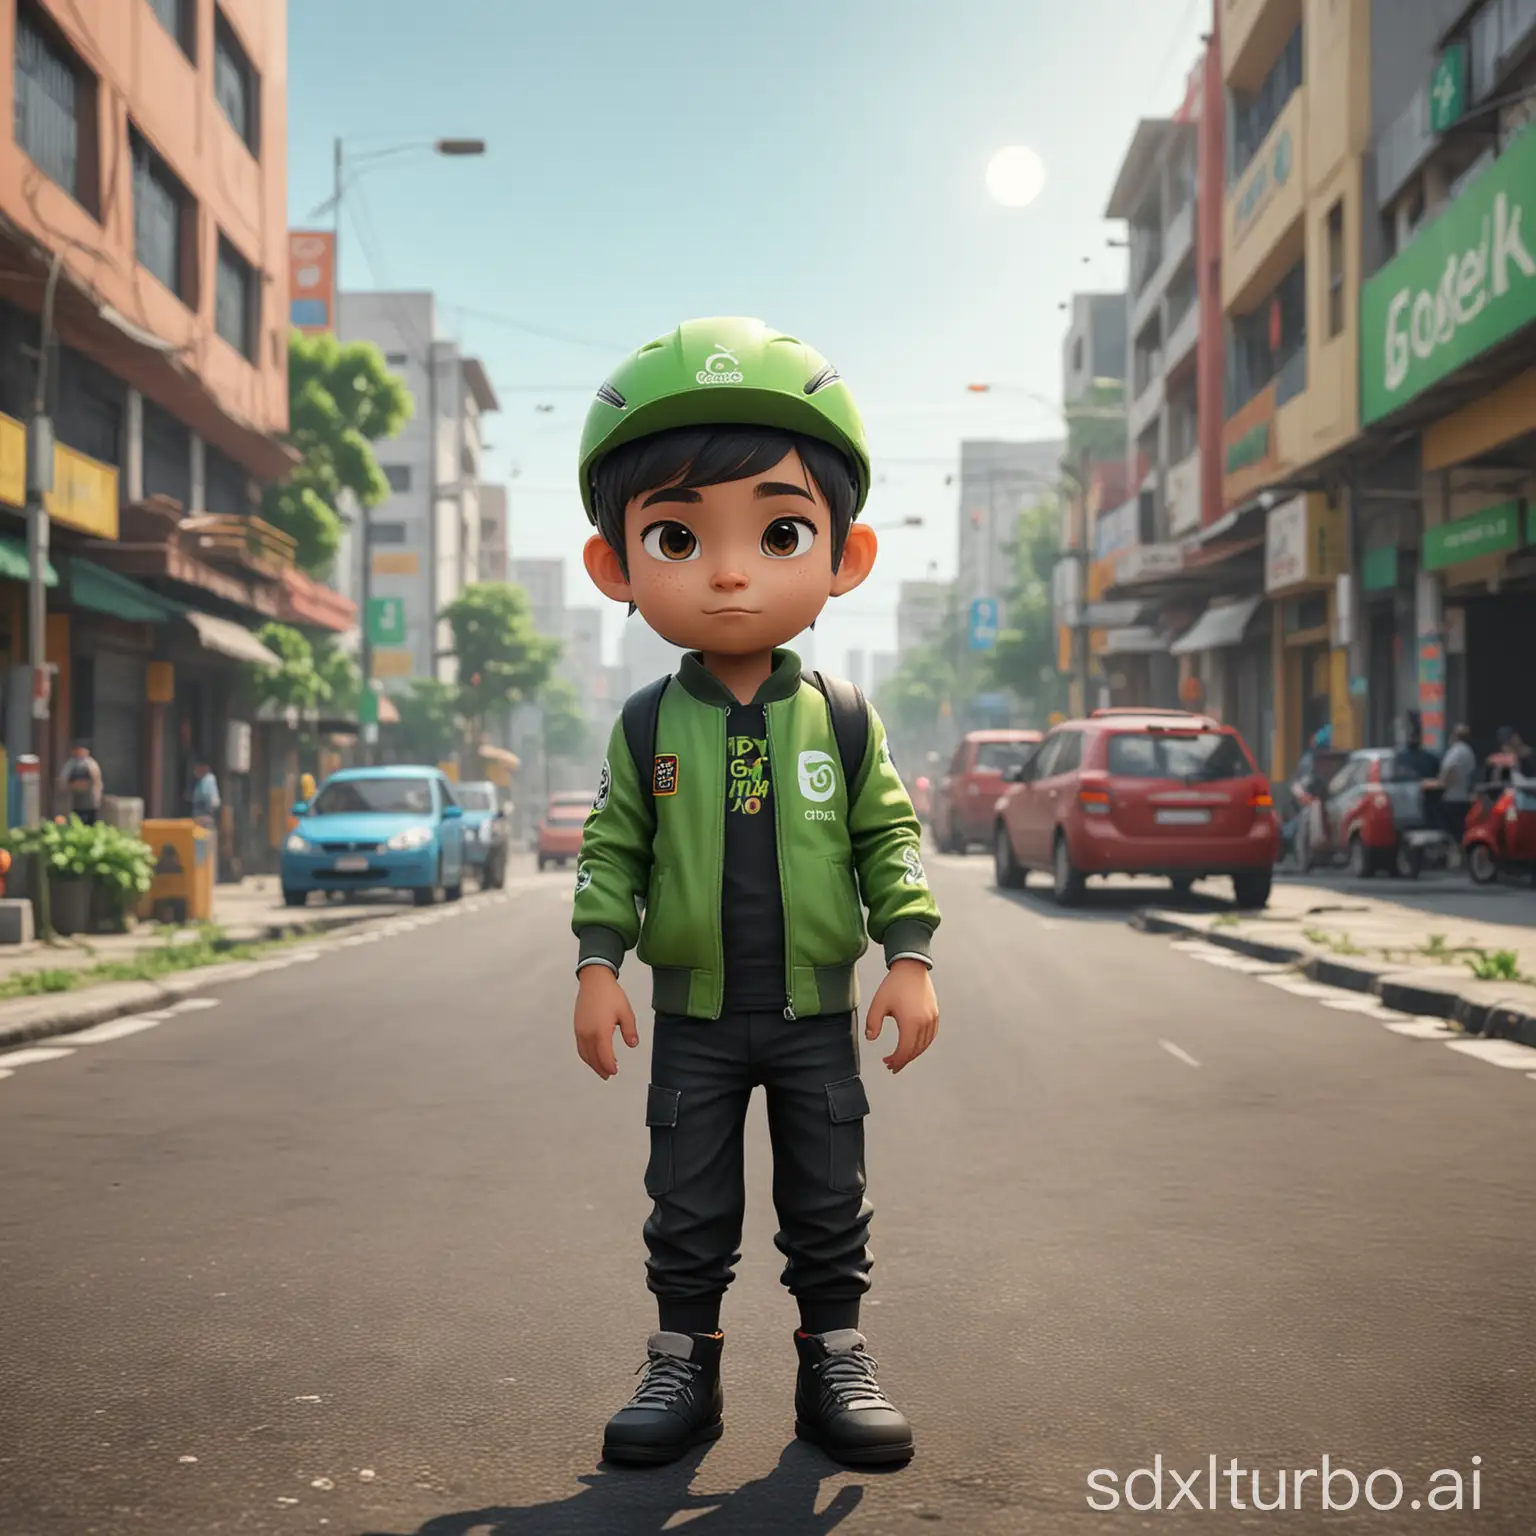 Little child gojek driver, game character, stands at full height